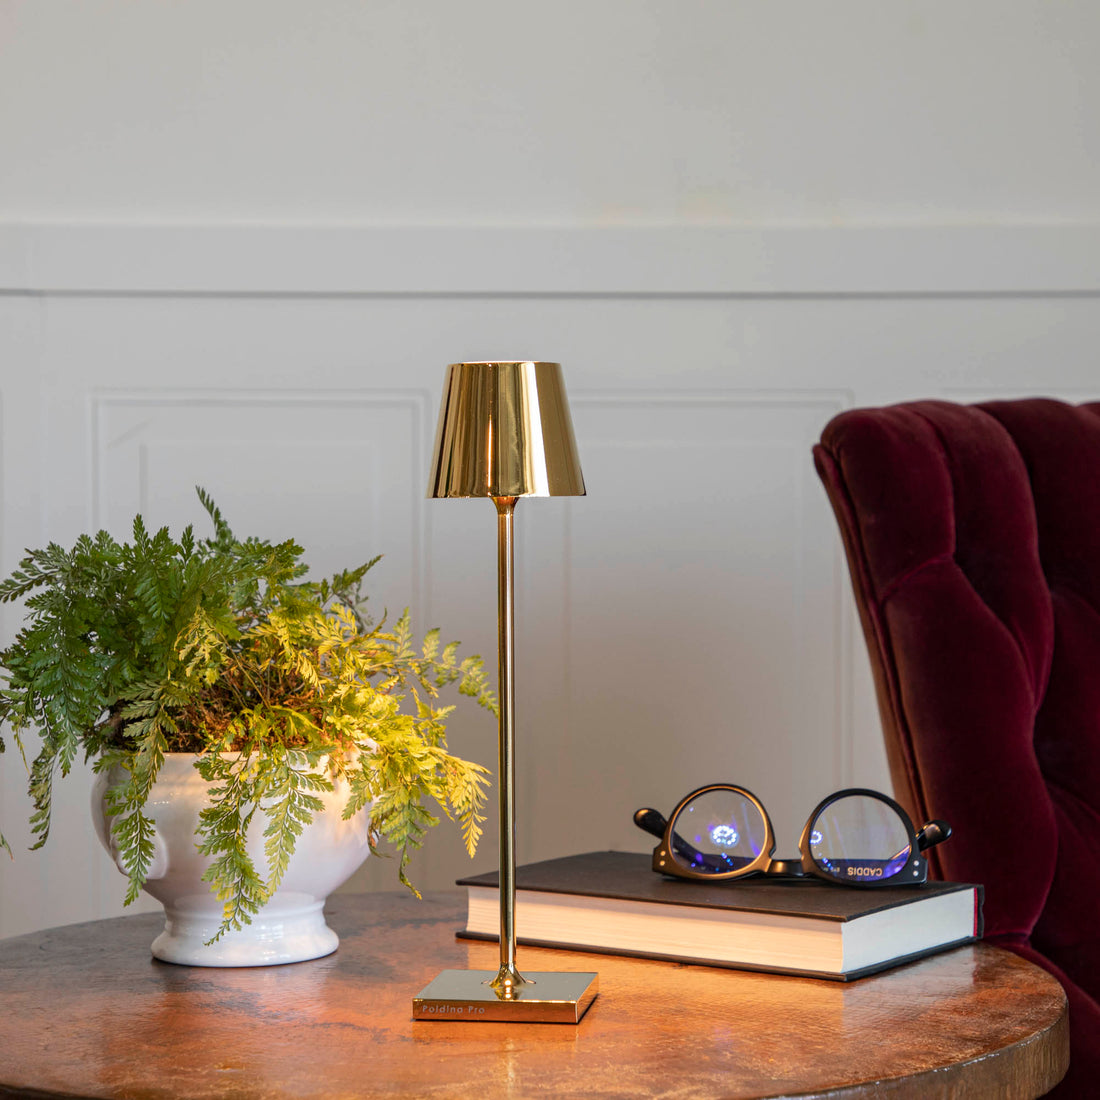 A Zafferano Glossy Gold Micro Cordless Lamp illuminates a corner featuring a potted fern, a closed book, and eyeglasses on a wooden side table.